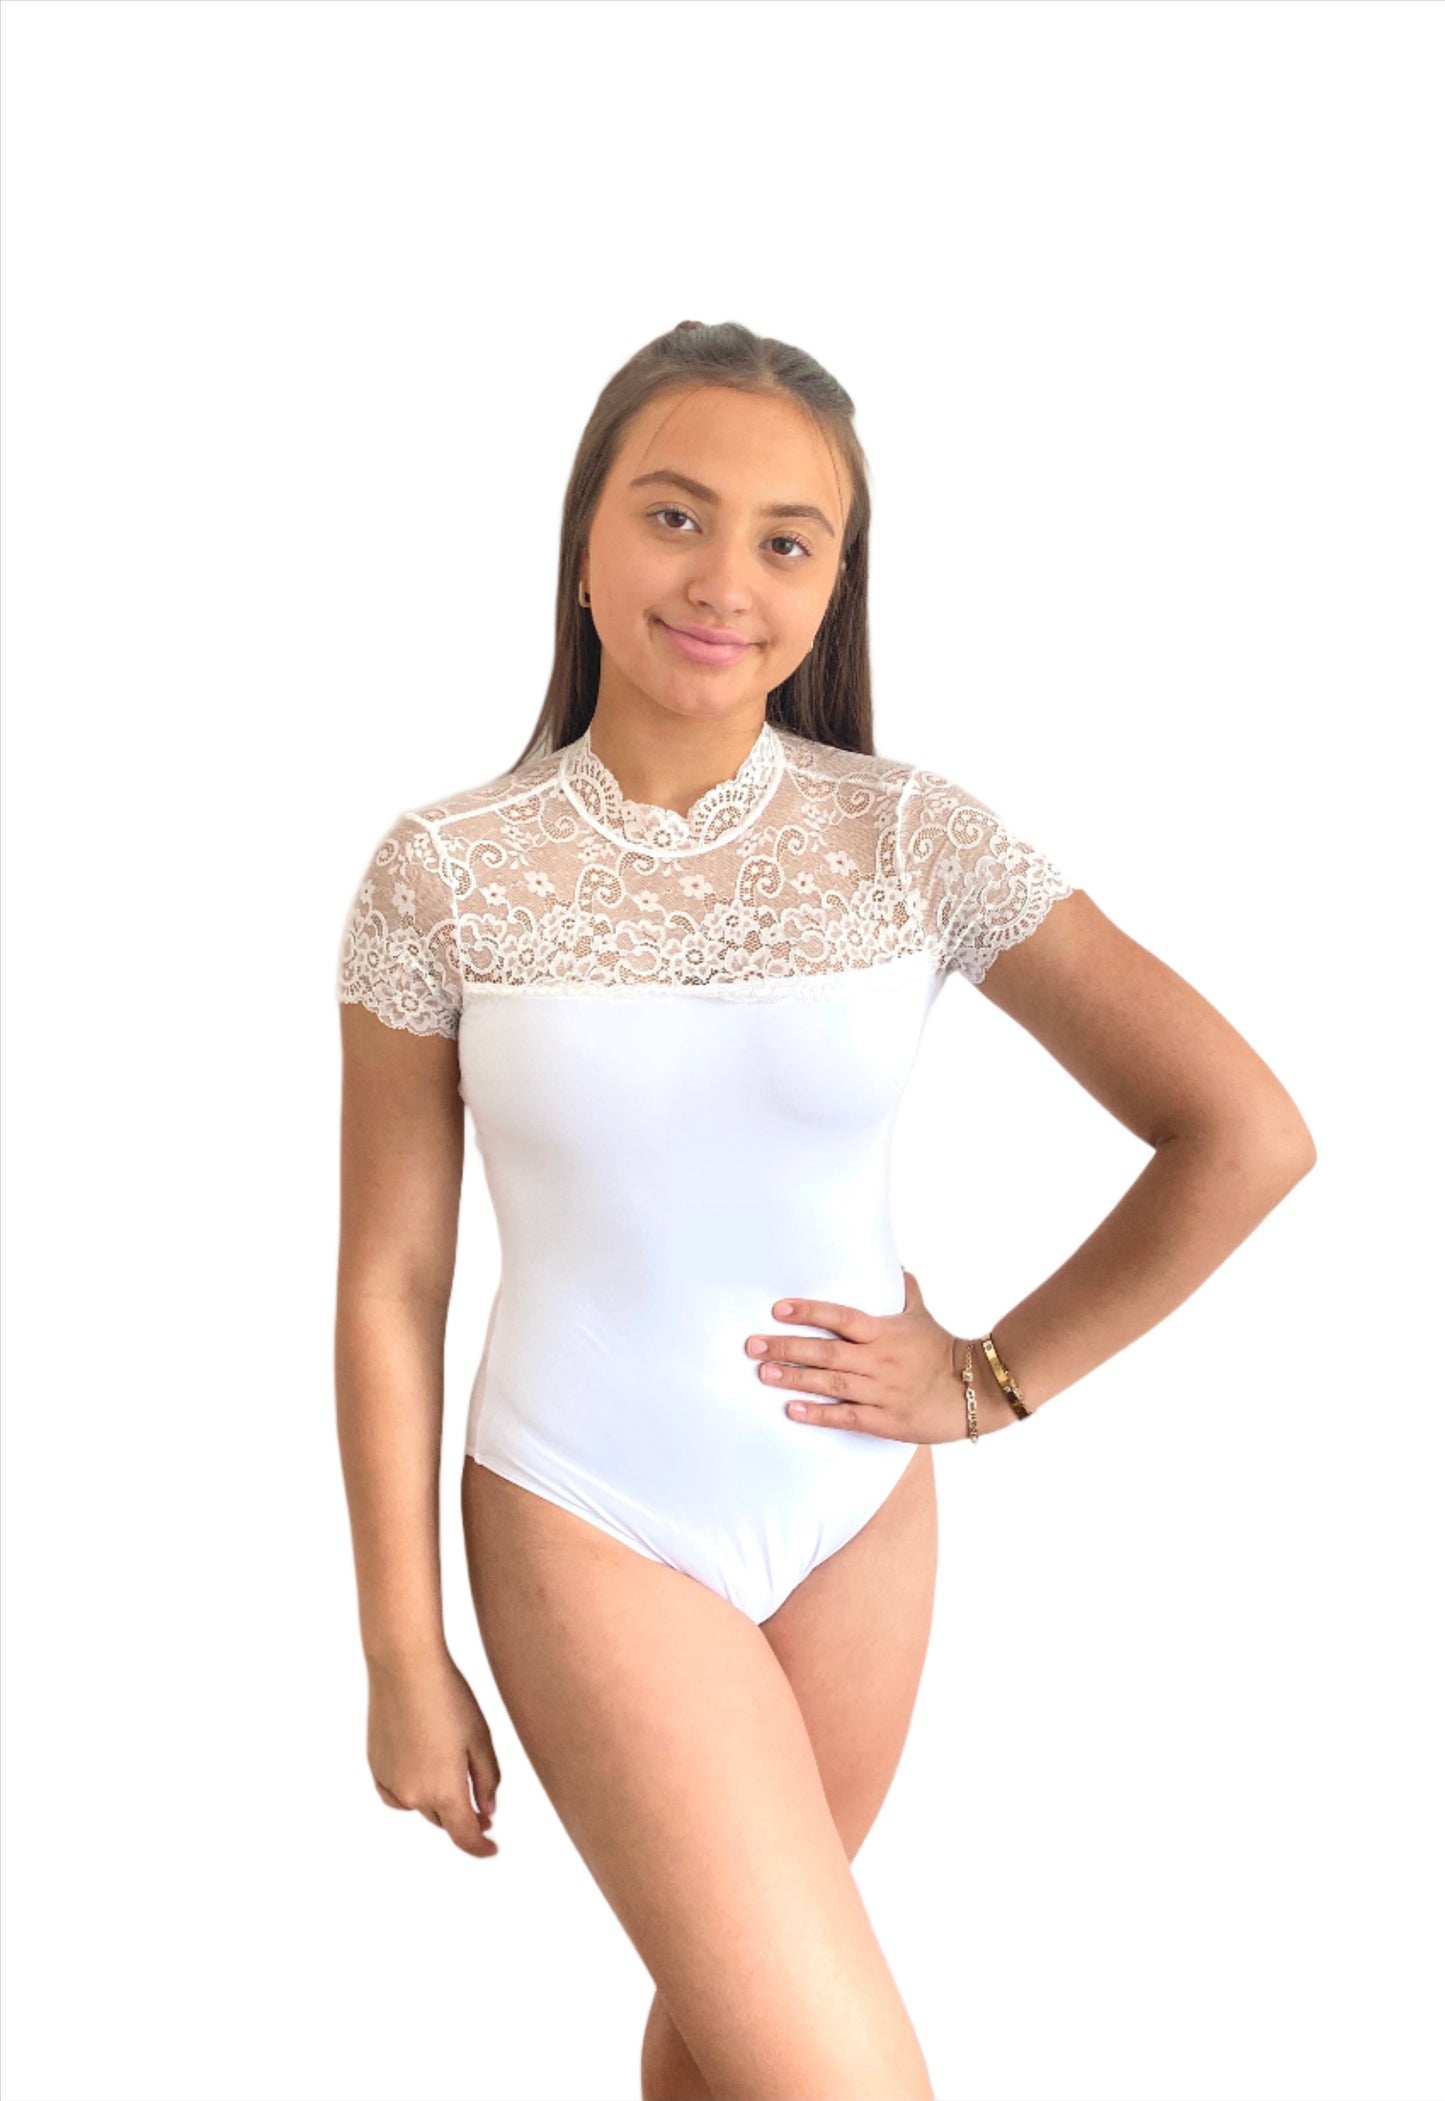 Ballet leotard with lace top, lace sleeves and key hole back in white from The Collective Dancewear